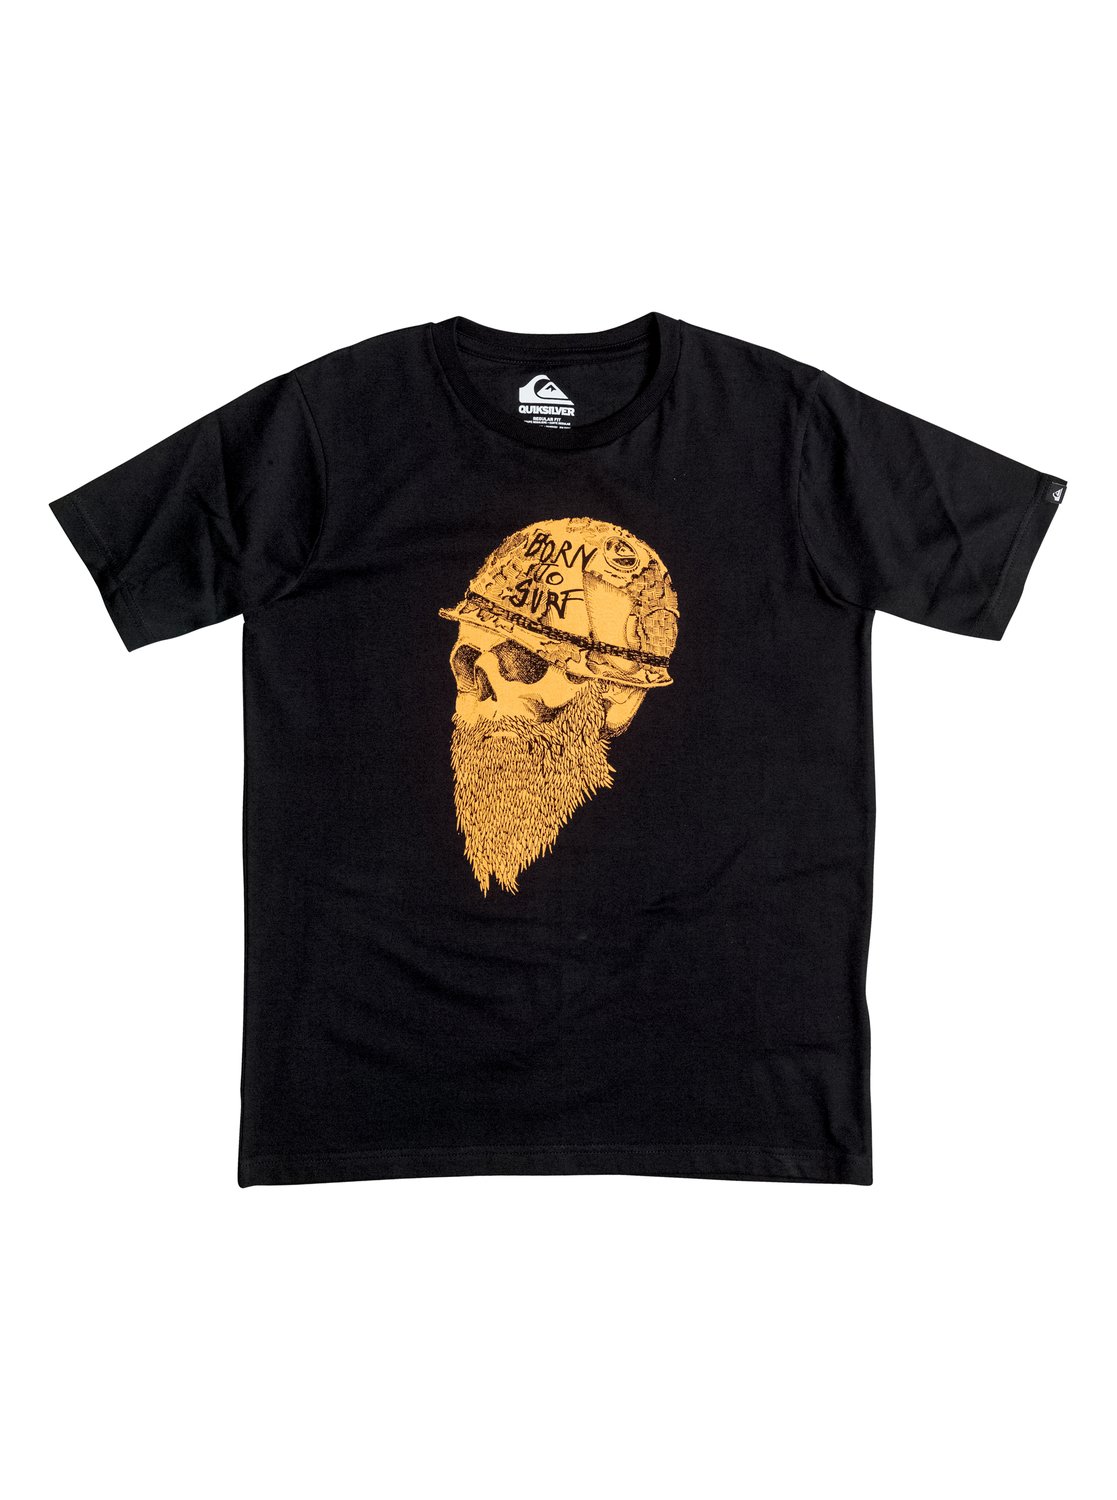 Classic Born To Surf - T-Shirt - Quiksilver<br>